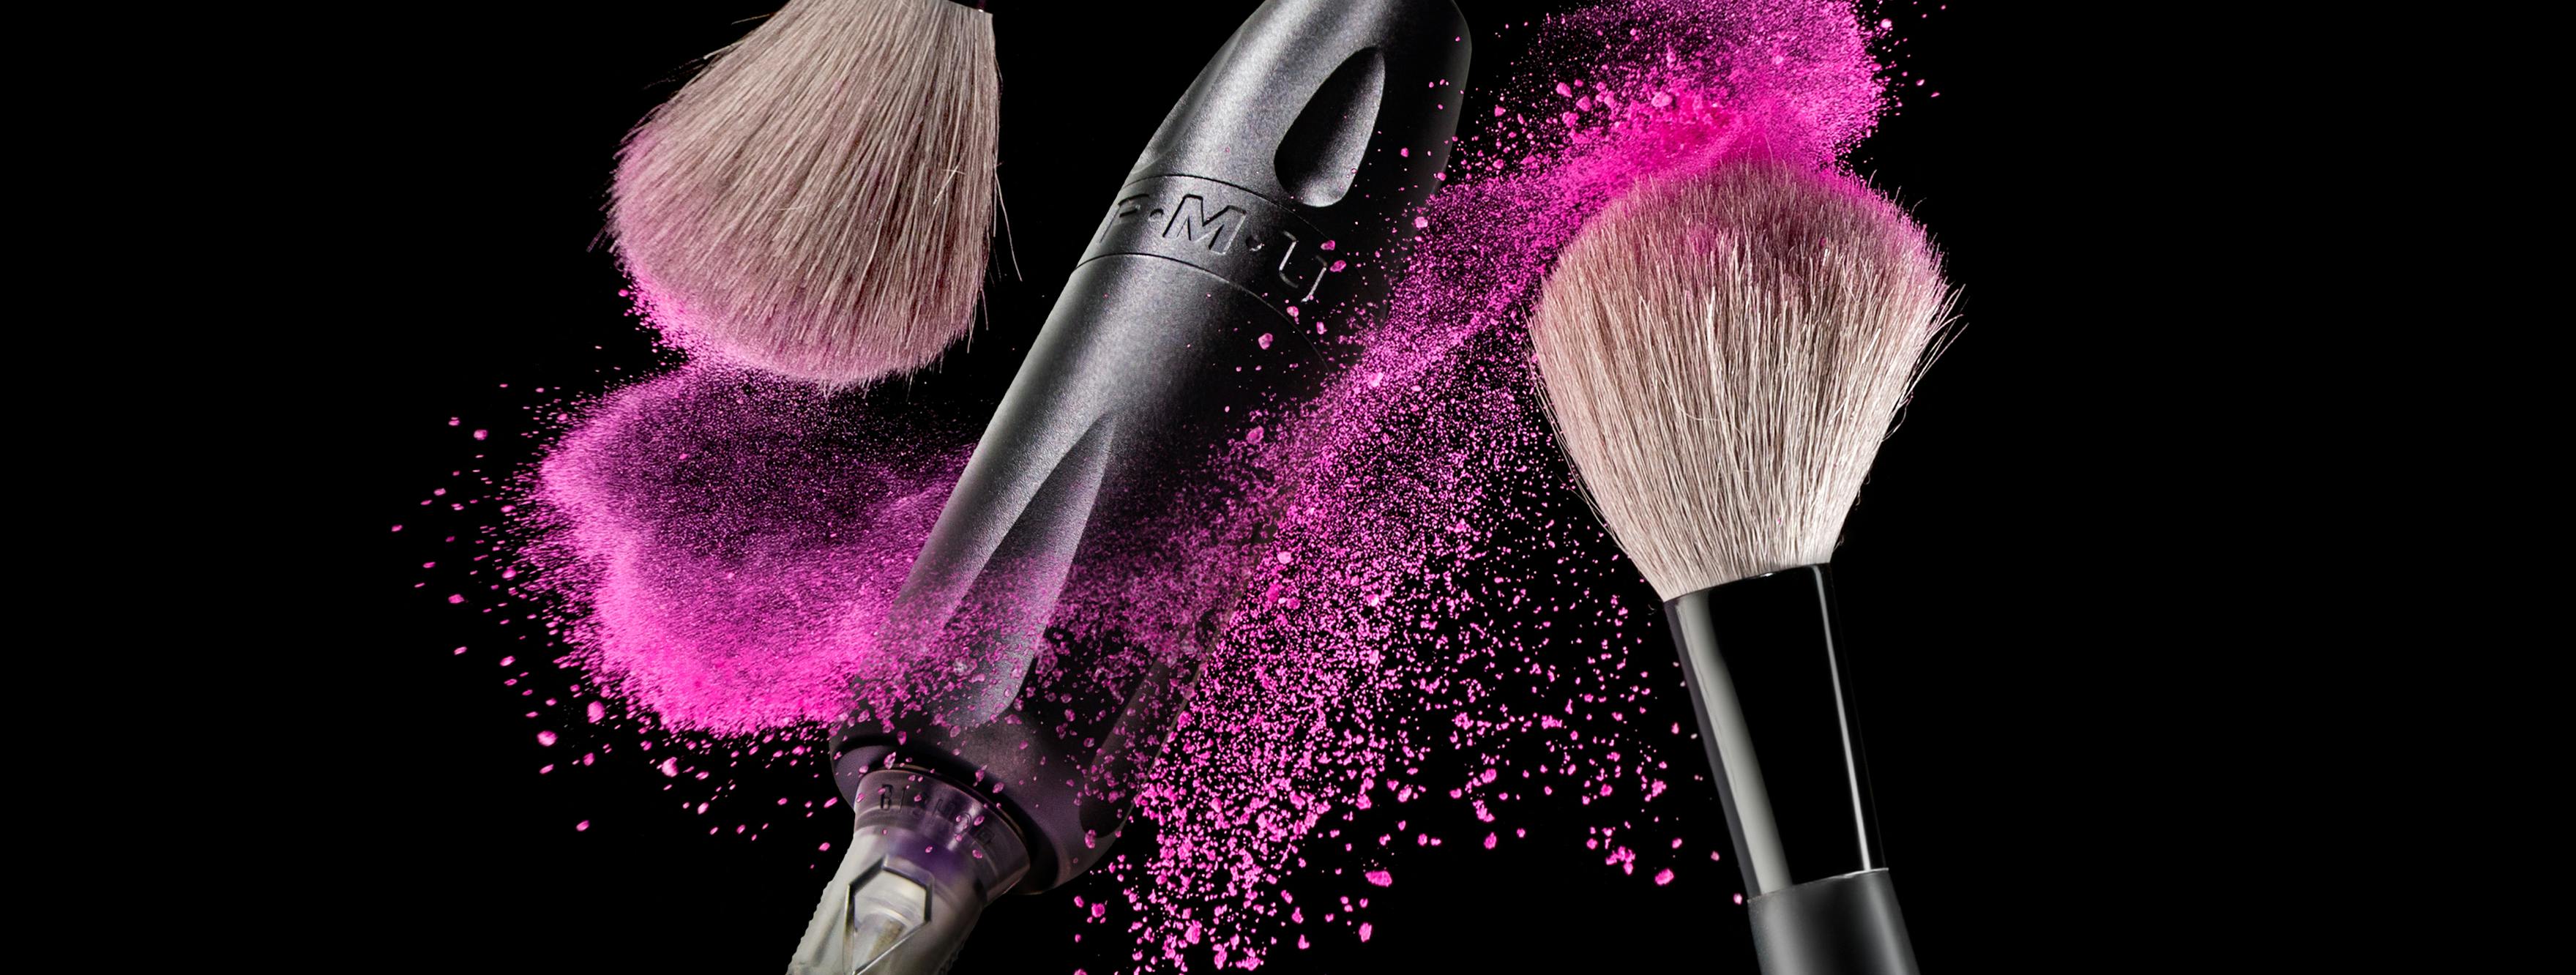 Makeup brushes with powder and tattoo pen machine